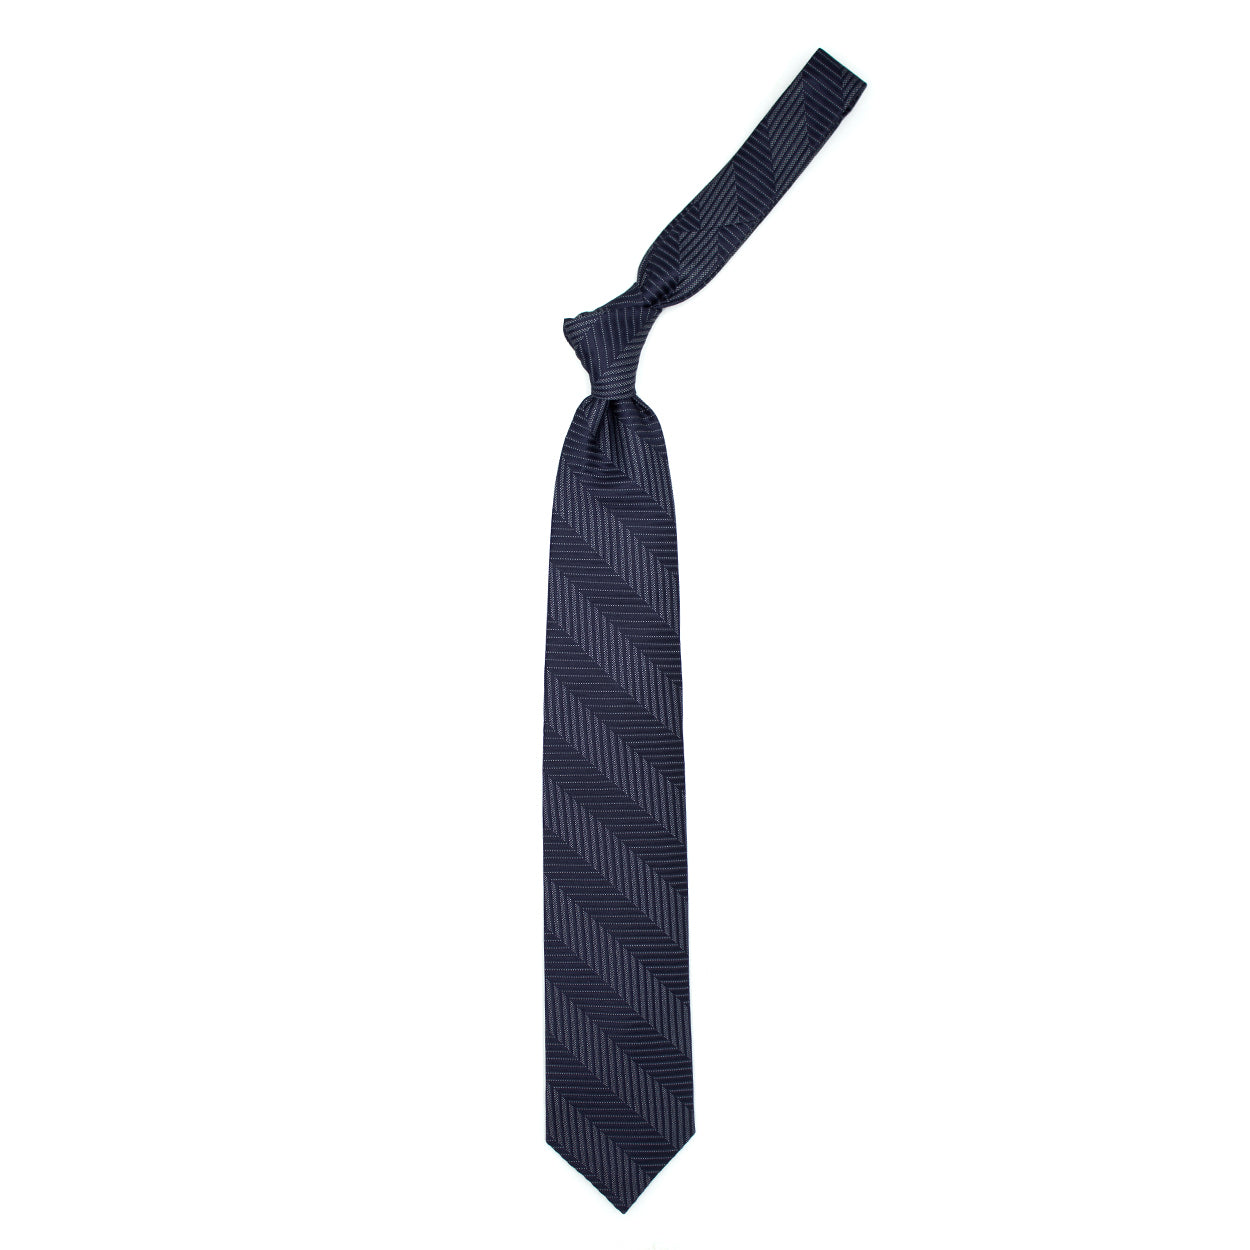 Blue tie with grey textured stripes